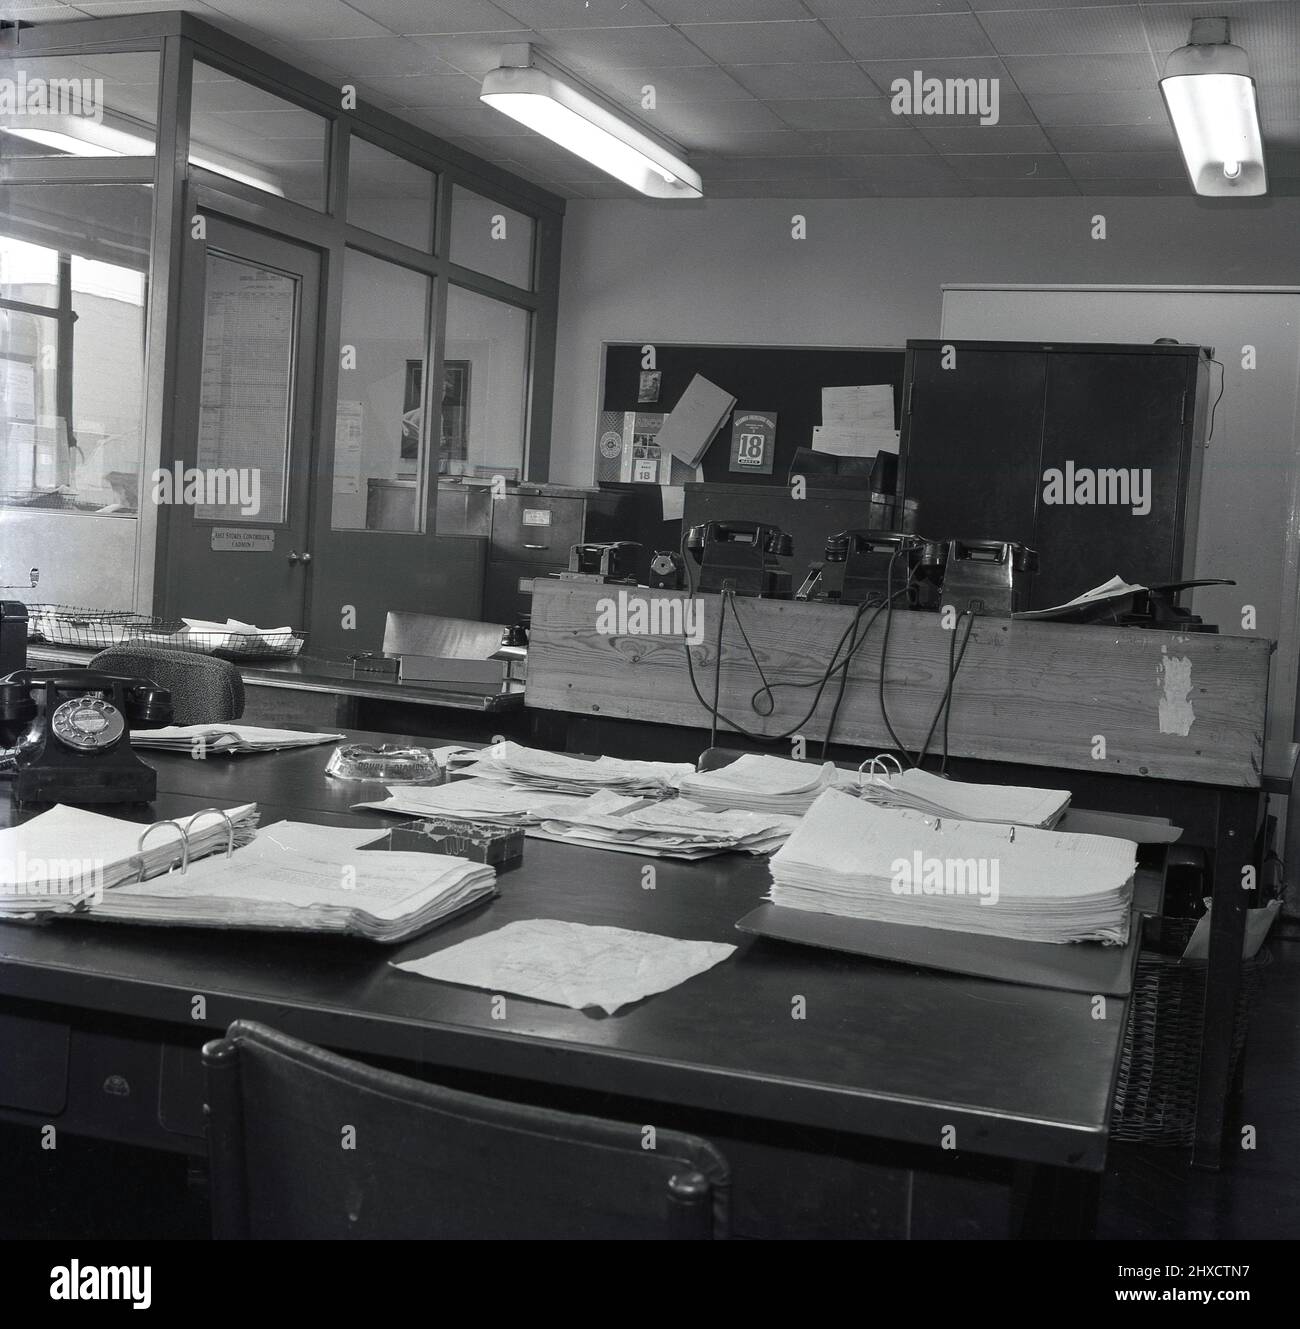 1958, historical, view of an empty admin office an industrial premises, showing a paperwork, delivery notes and files on a desk, several dial-up bakerlite telephones of the era, and metal filing cabinets. A Double Diamond branded ashtray sits on the desk, Port Talbot, Wales, UK. Stock Photo